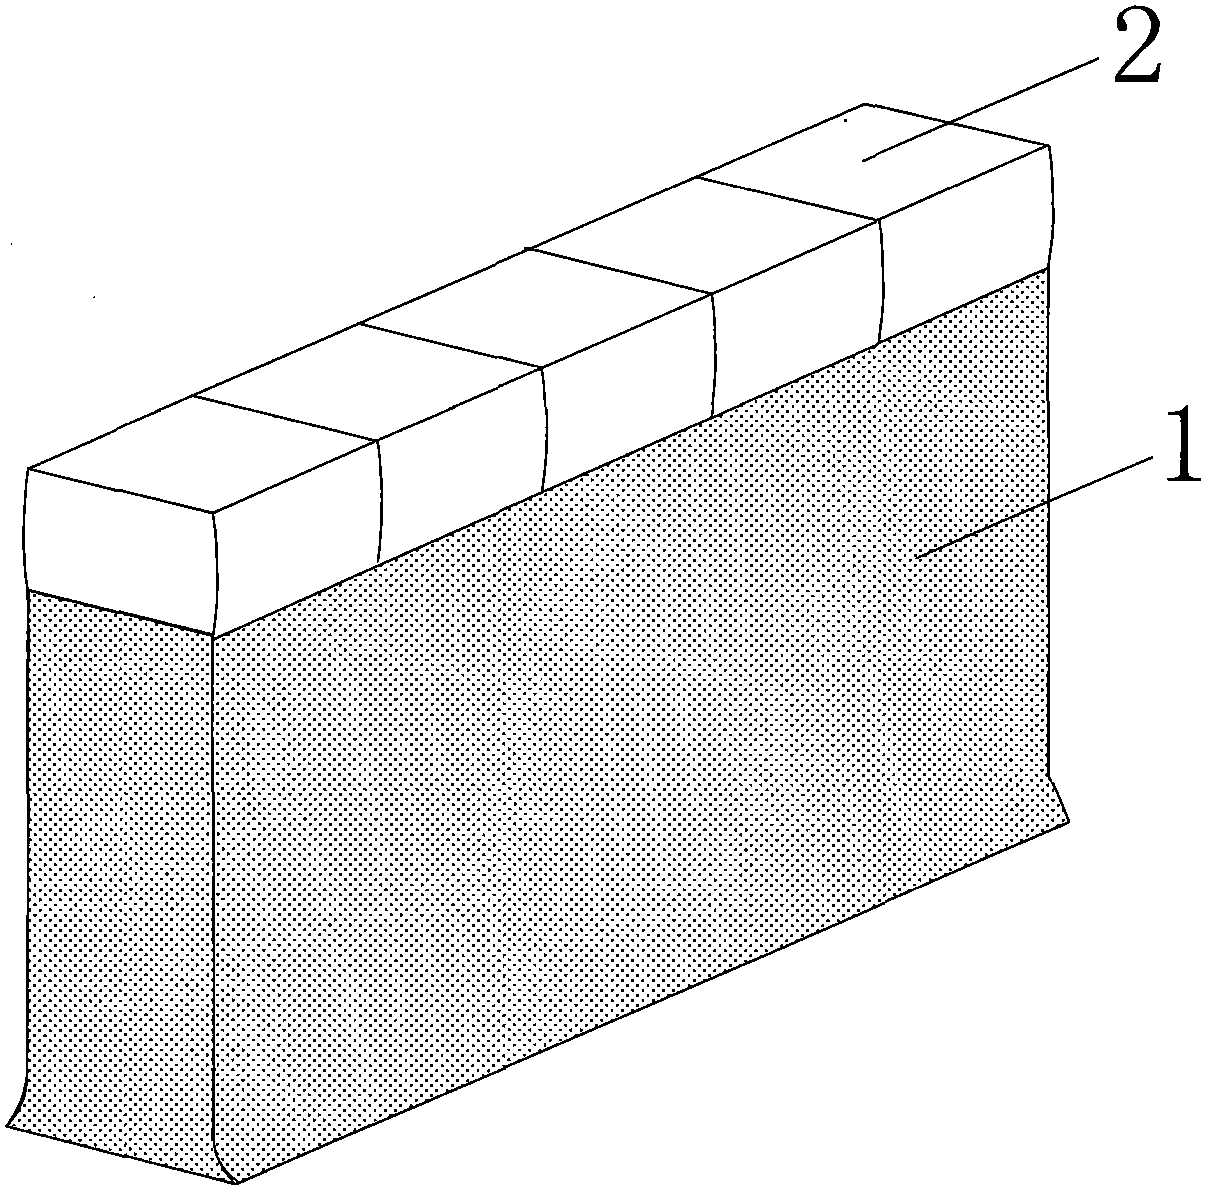 Roadside proper yielding unequal combined filling structure of gob-side entry retaining and construction method